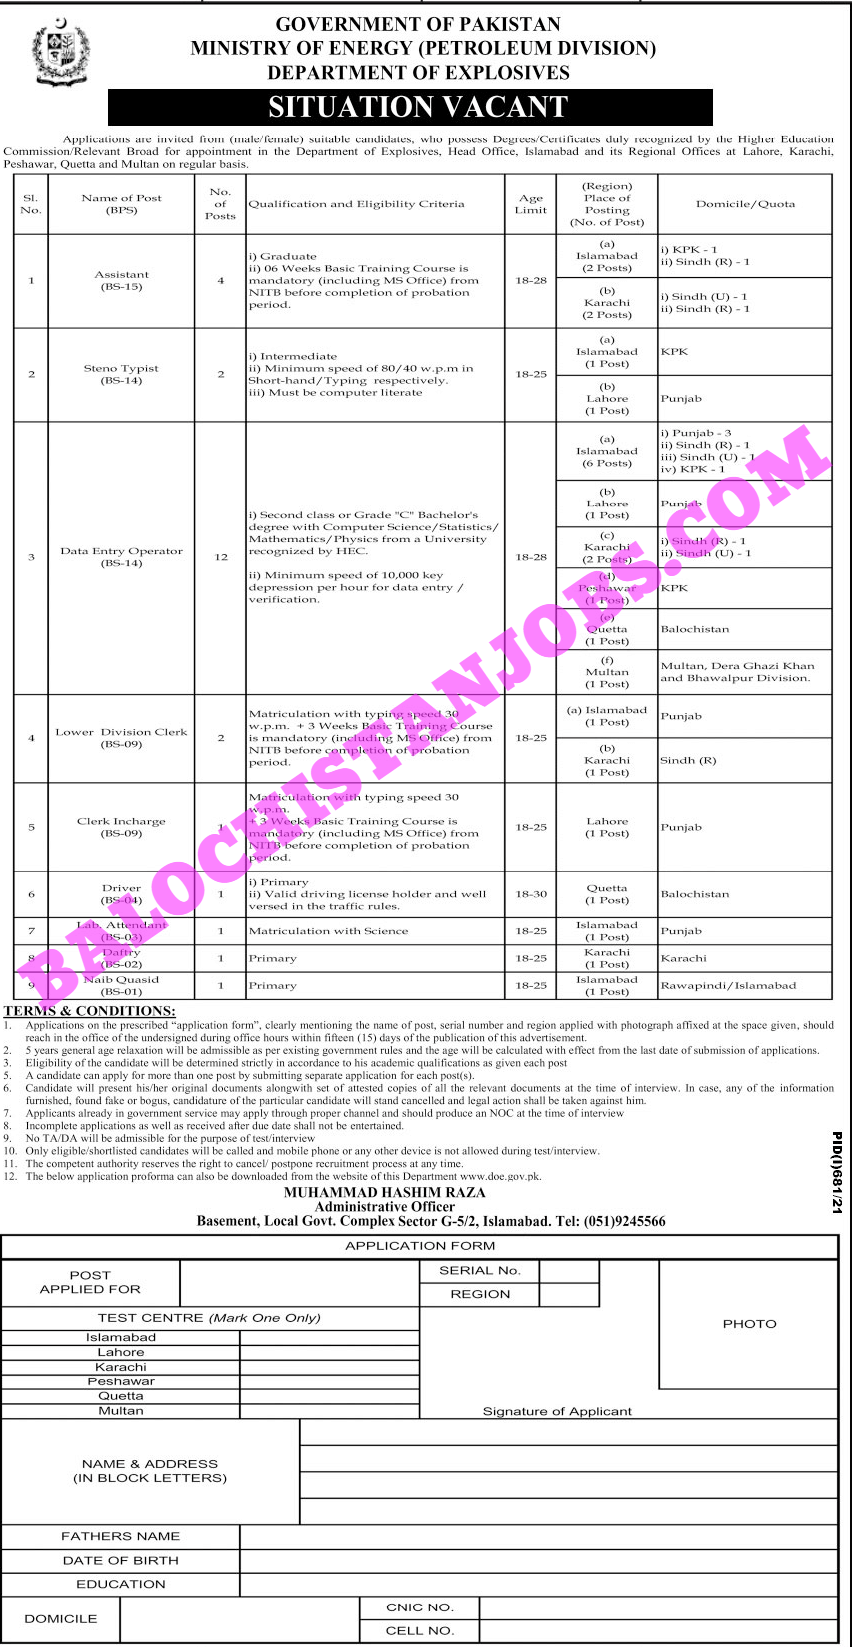 Ministry of Energy Government of Pakistan Jobs 2021